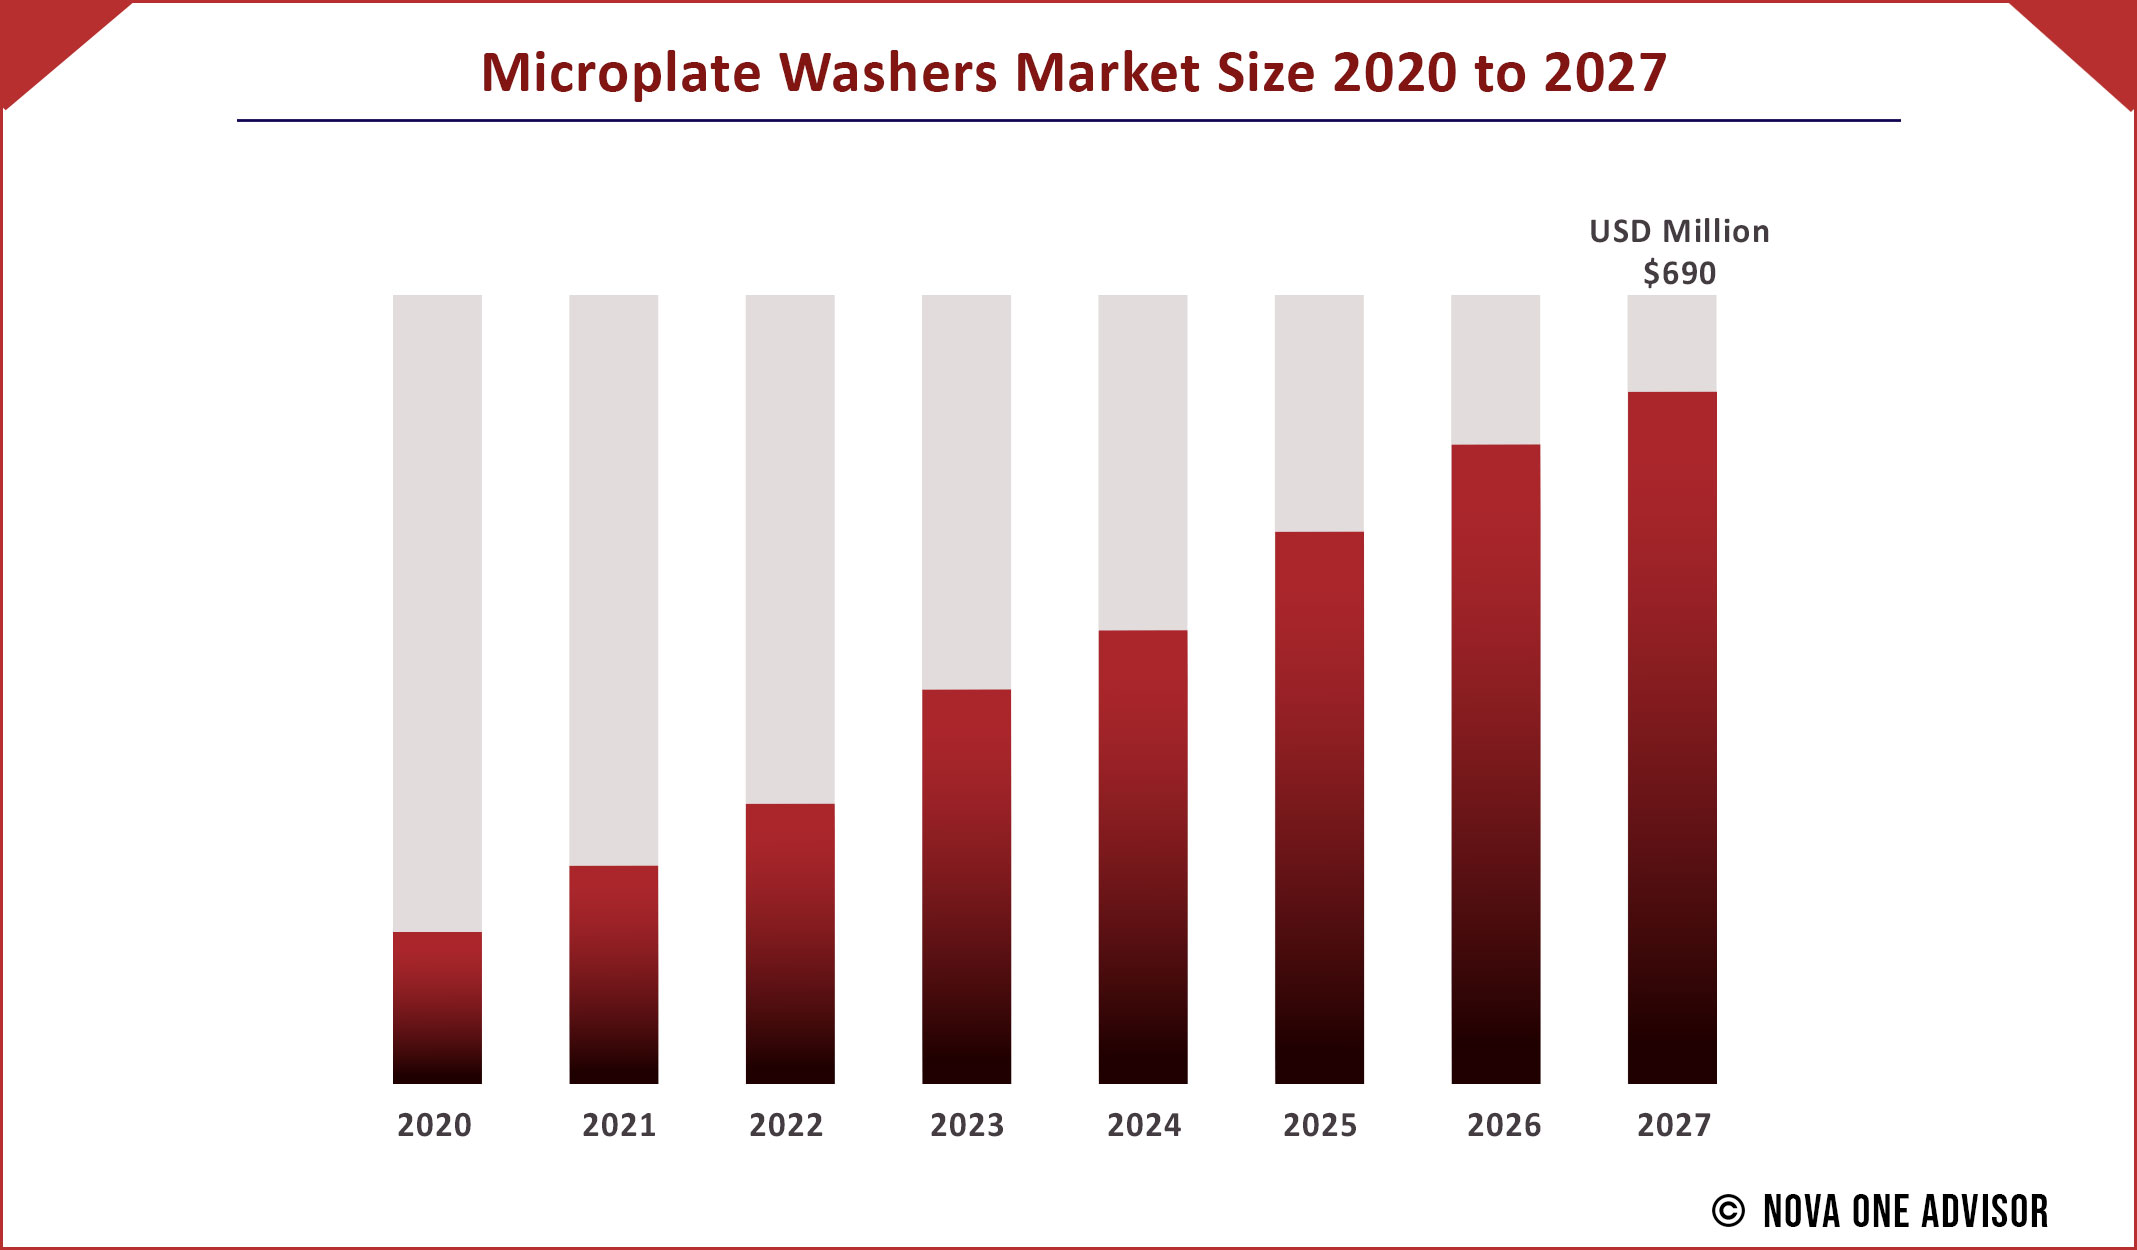 Microplate Washers Market Size 2020 to 2027